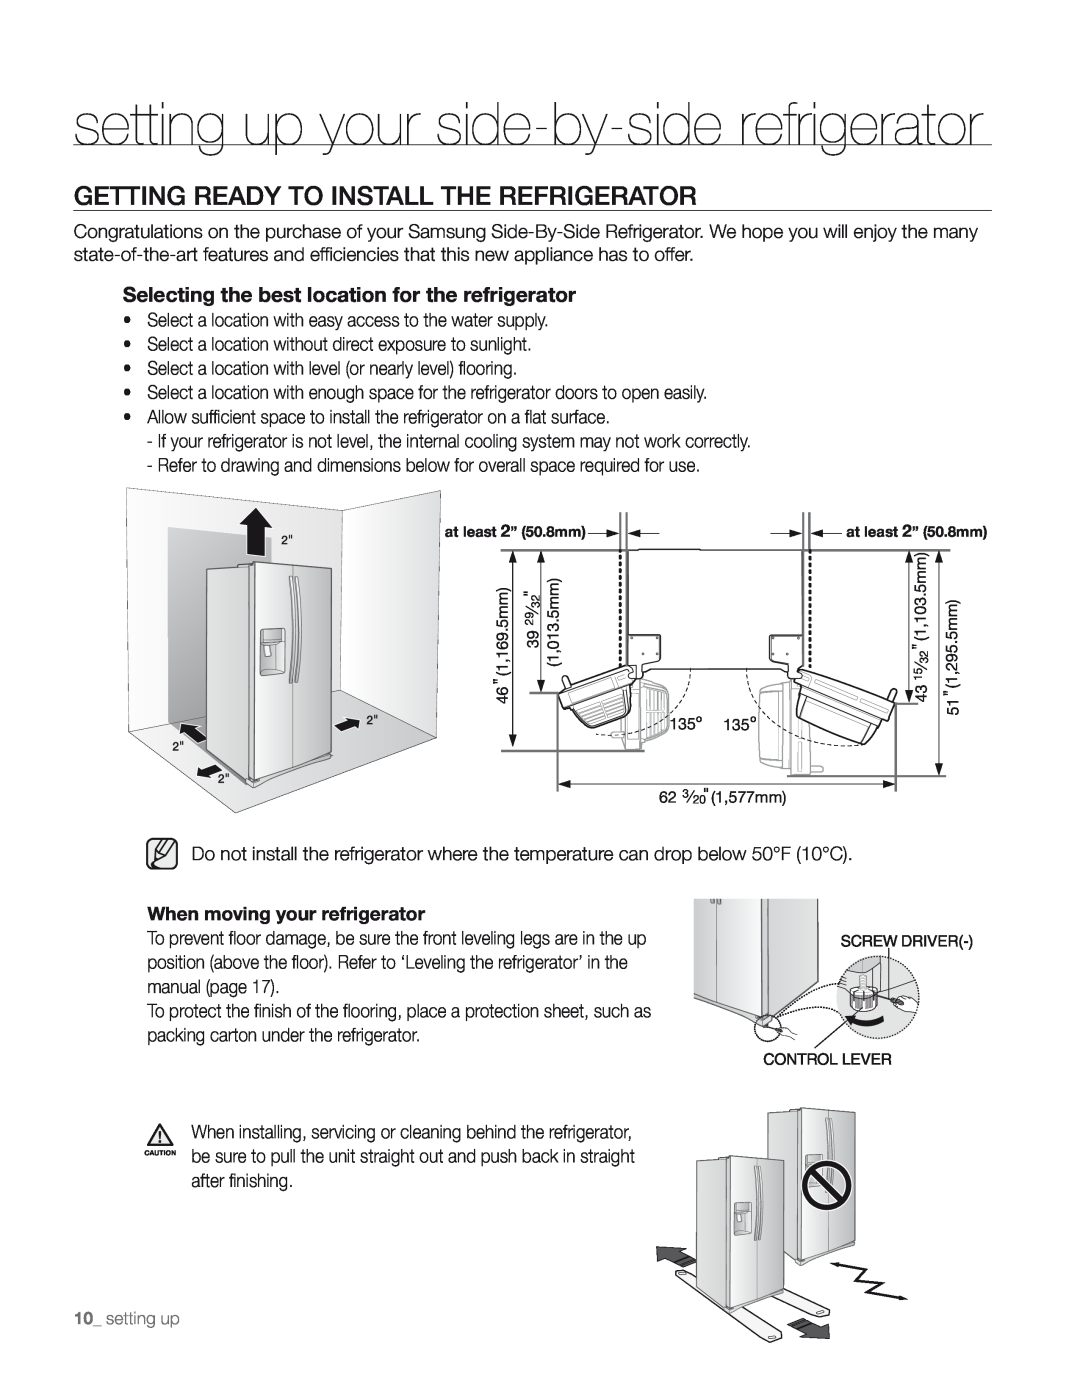 Samsung DA68-01890M user manual setting up your side-by-side refrigerator, Getting Ready To Install The Refrigerator 